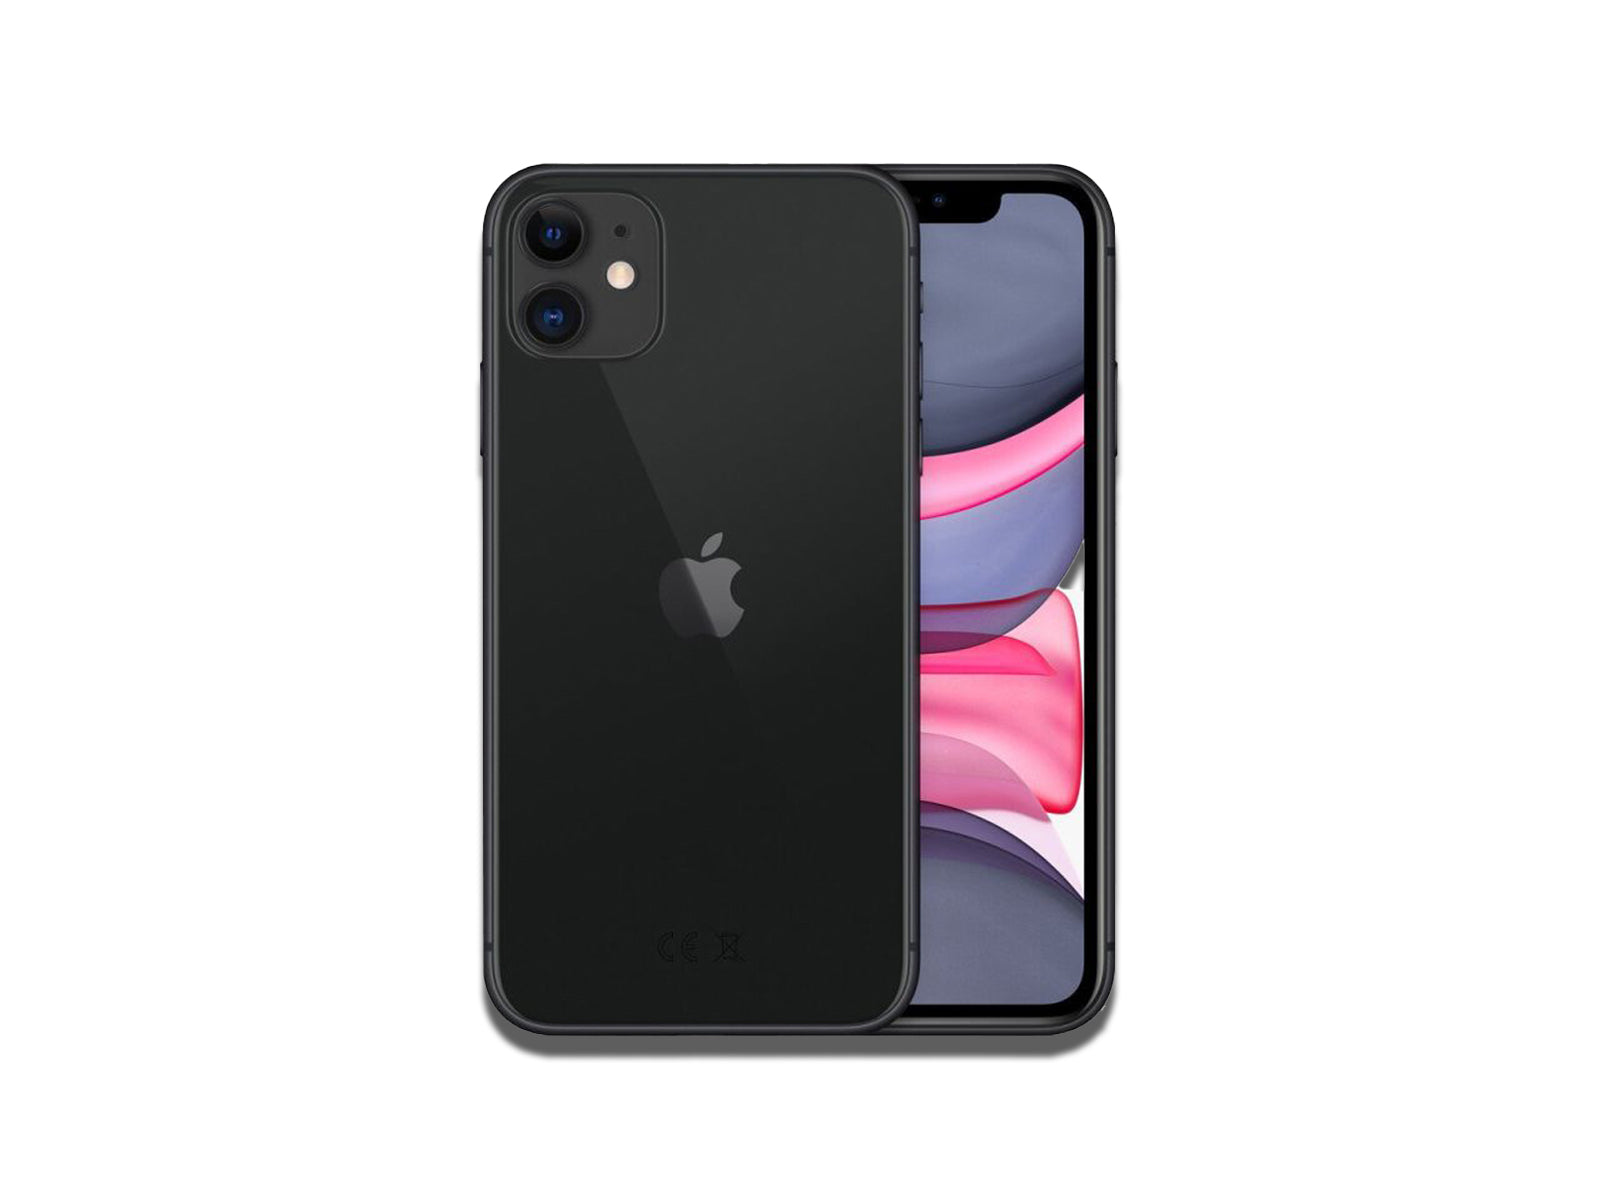 Apple iPhone 11 Black on the white background